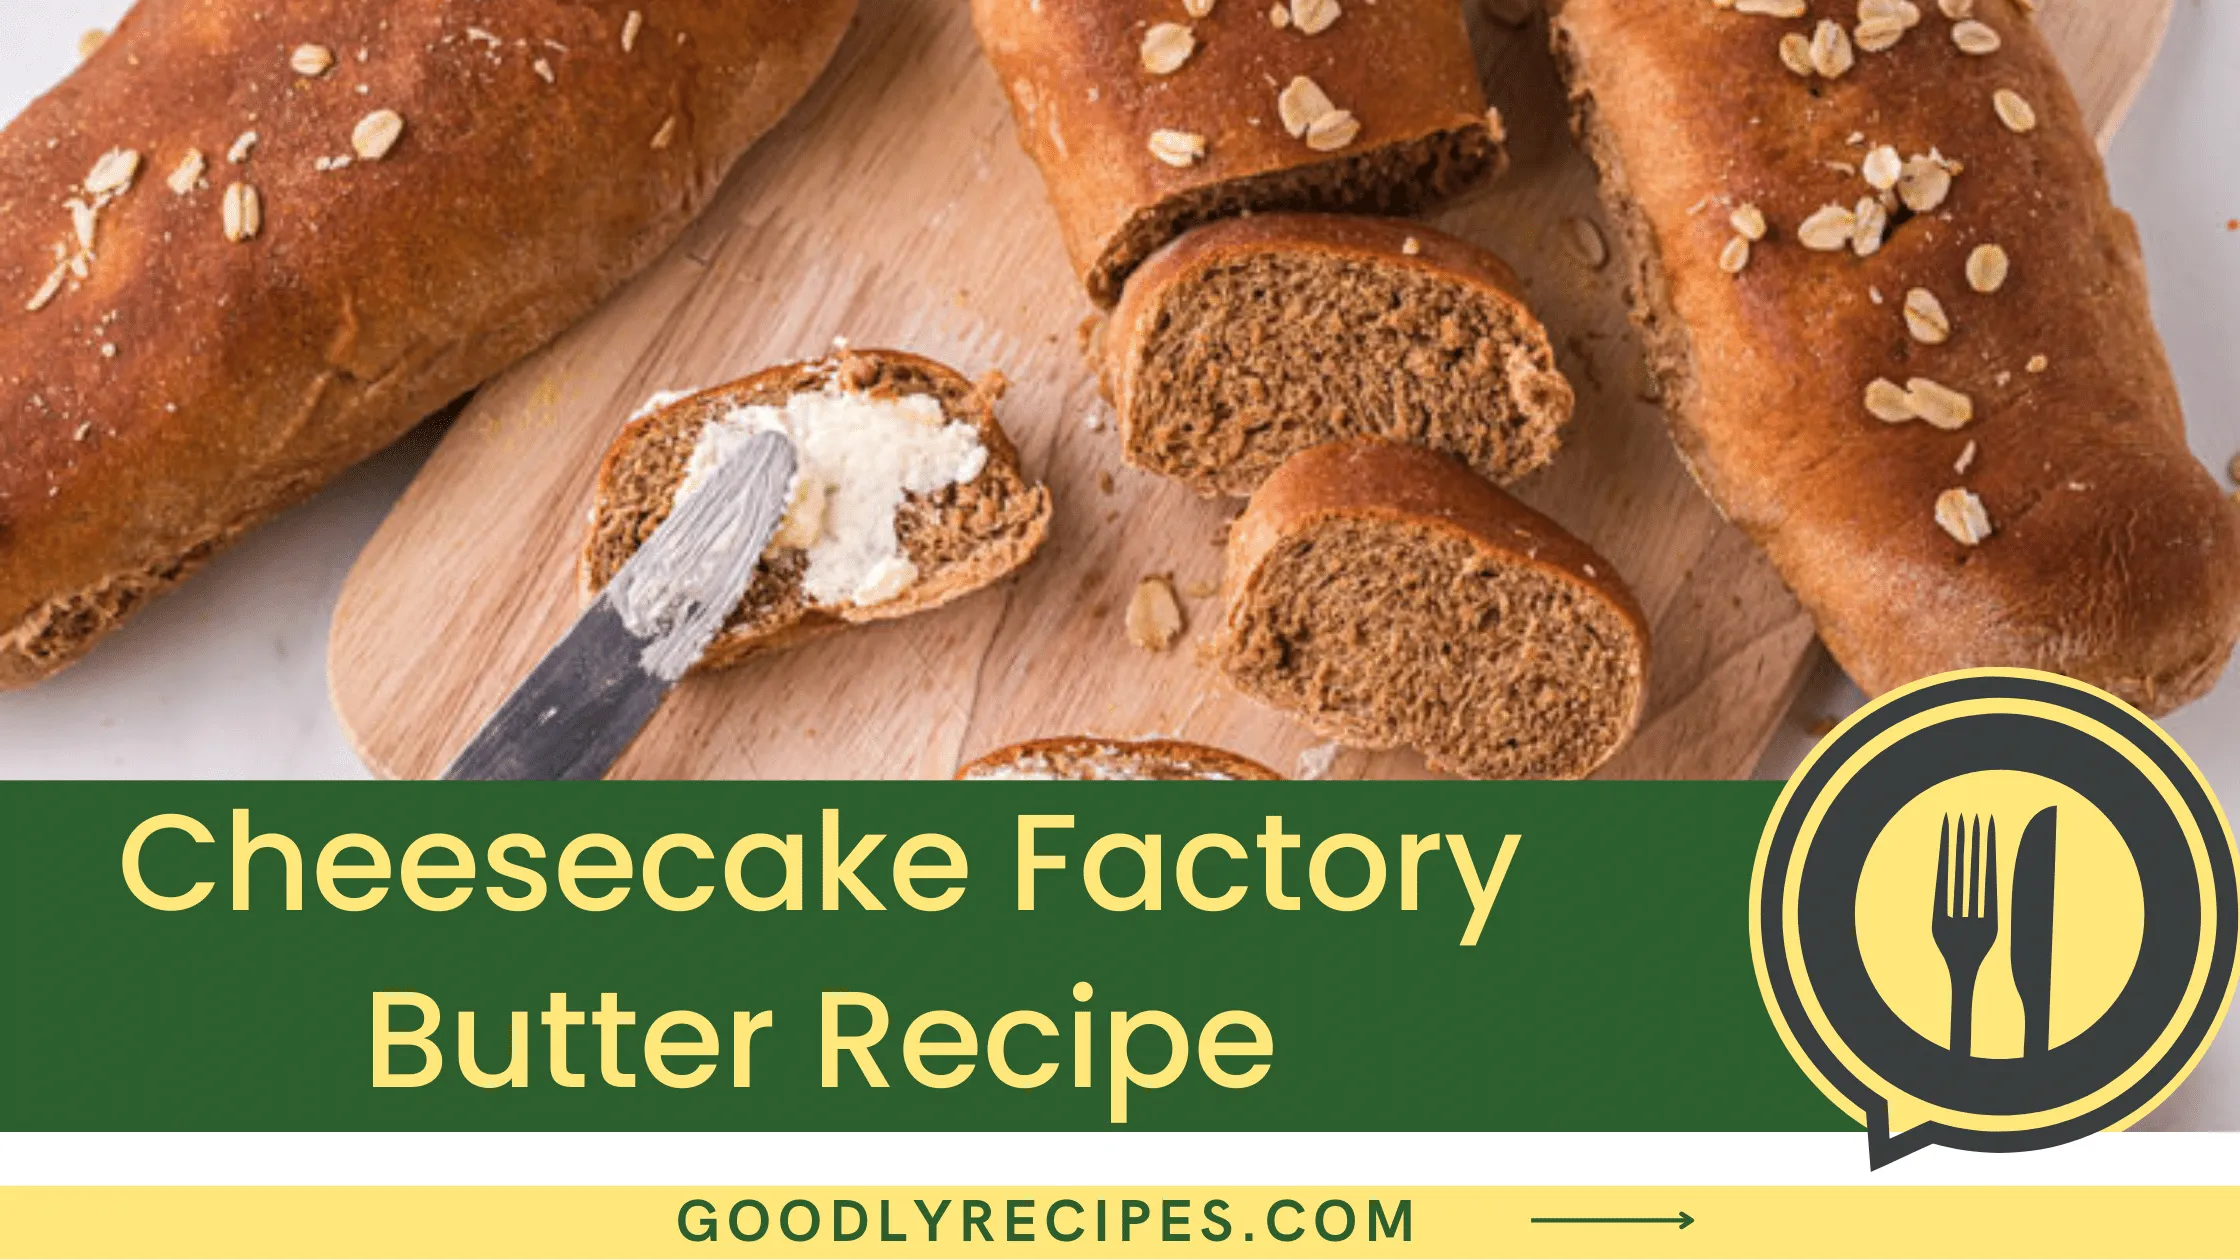 Cheesecake Factory Butter Recipe - For Food Lovers